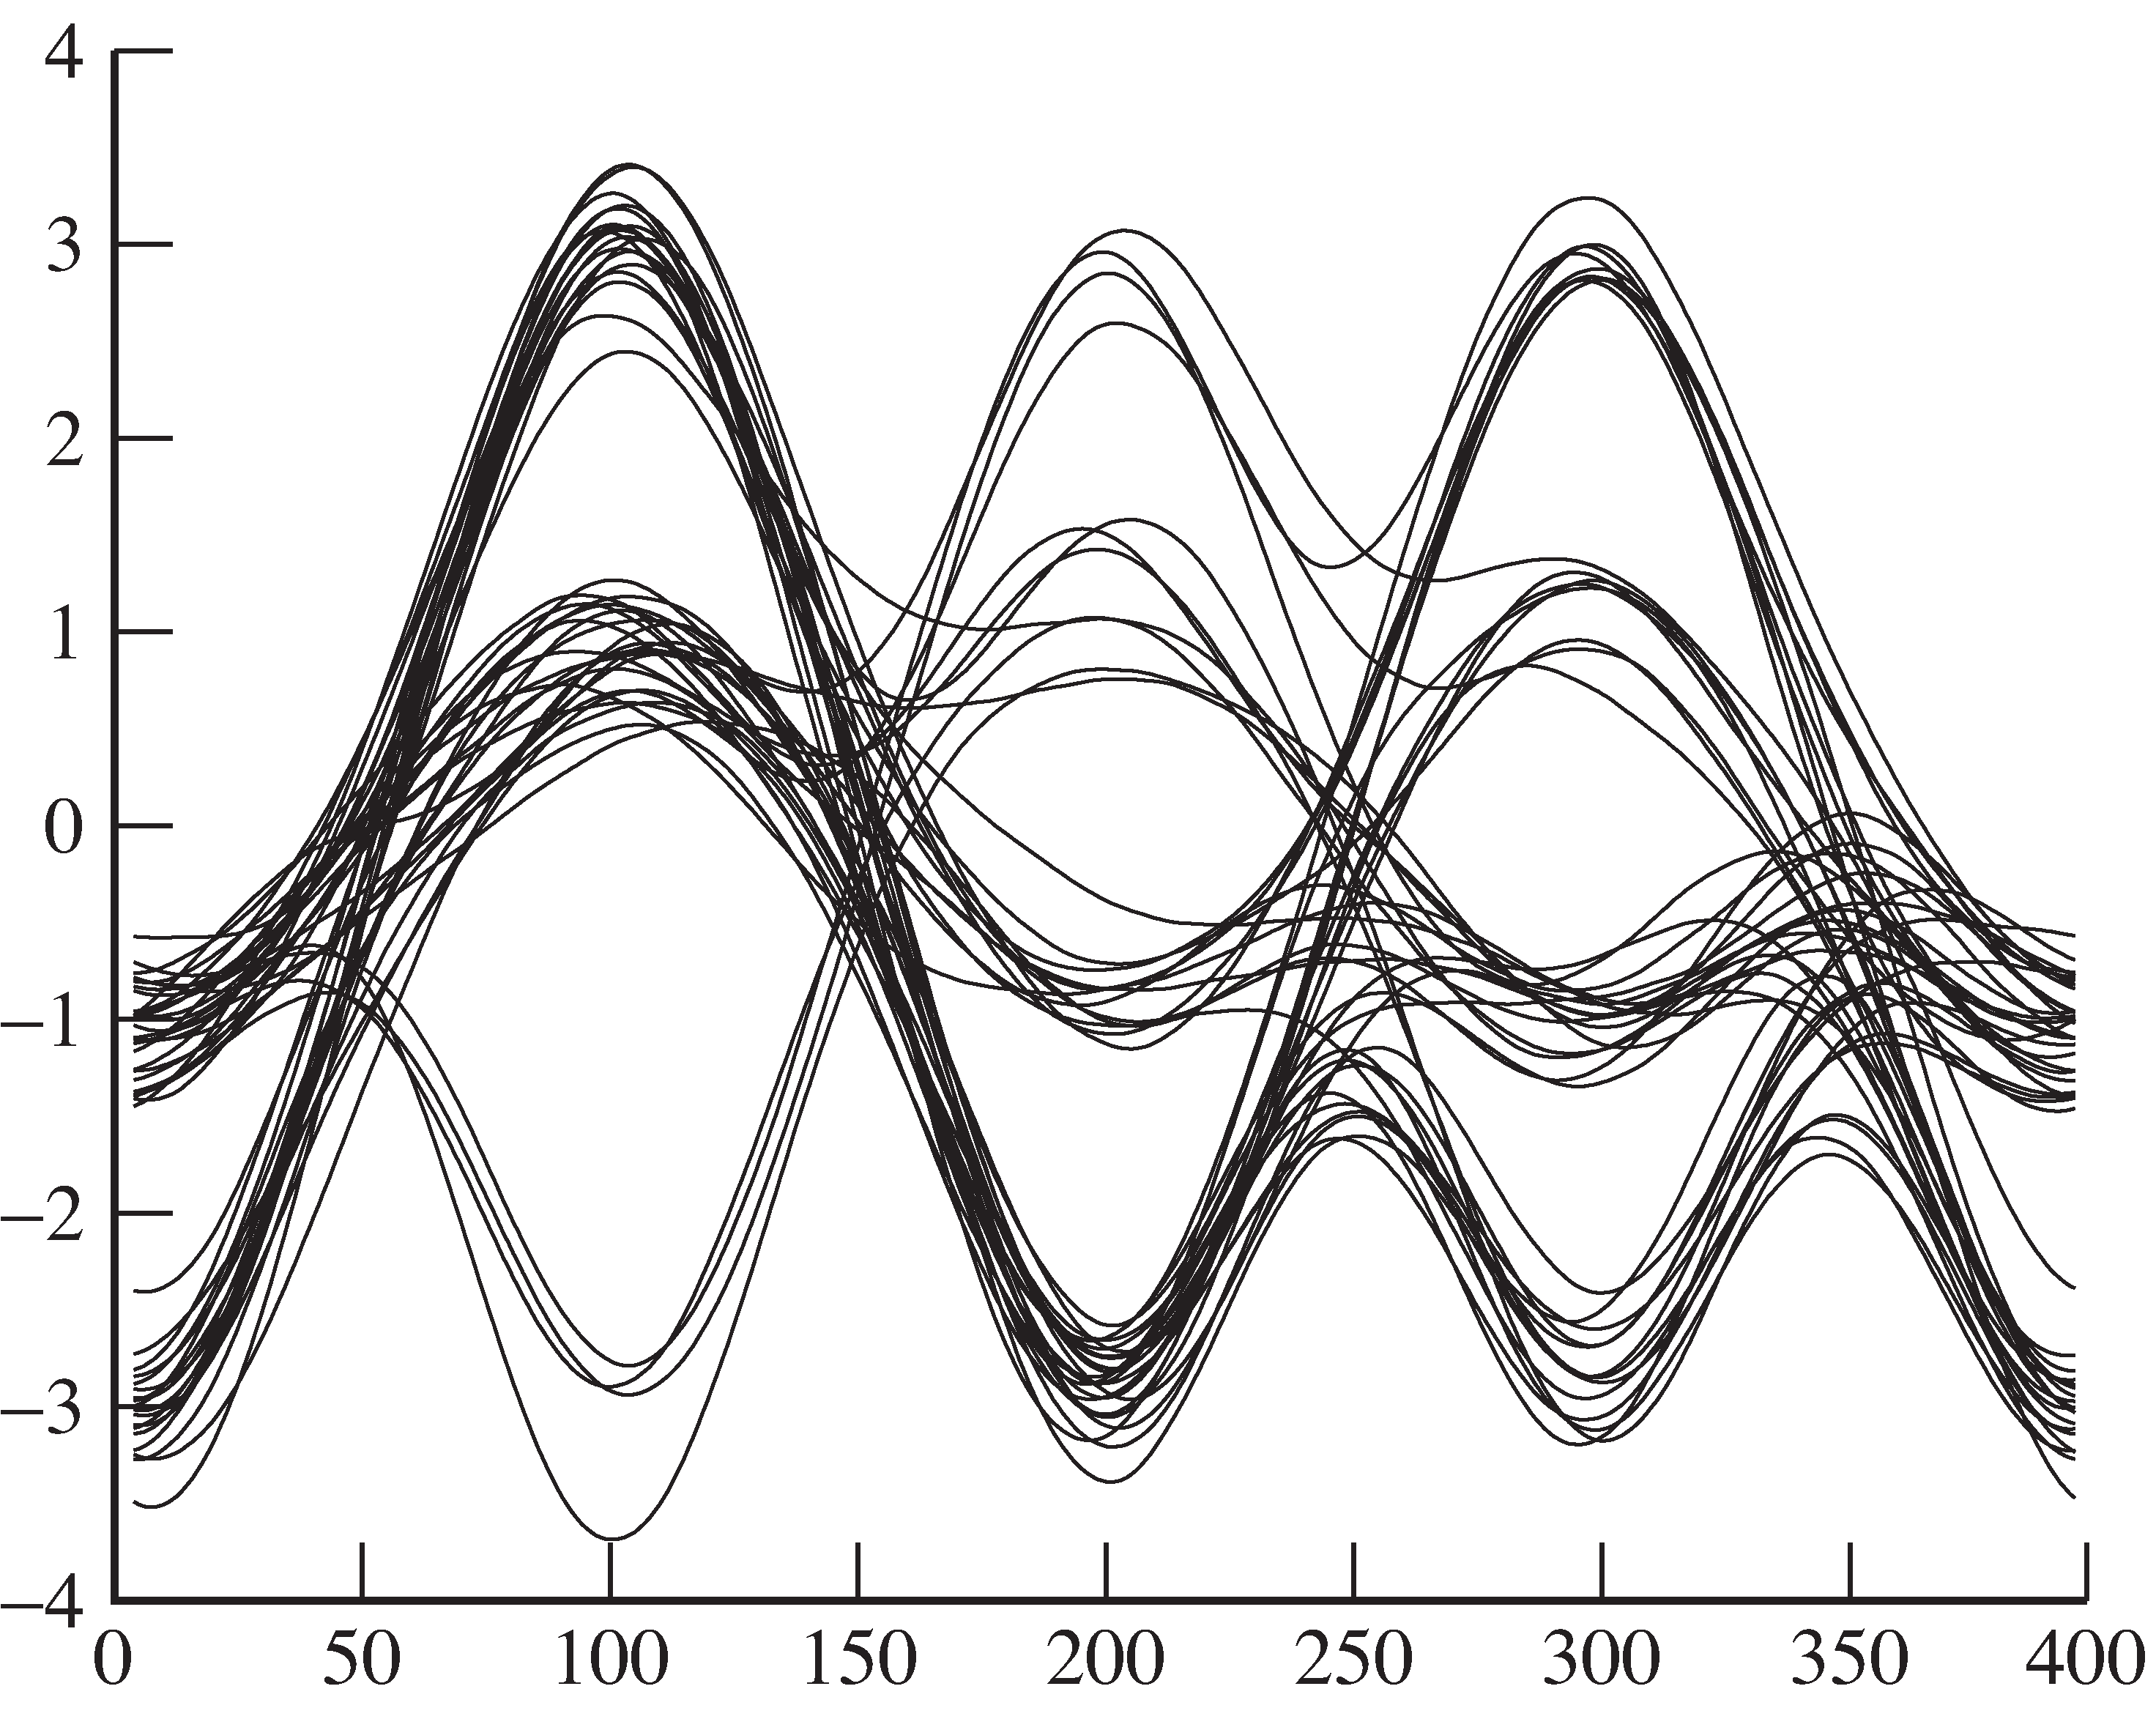 The eye diagram of the received signal y  after the correlation filter. The noise is reduced significantly.